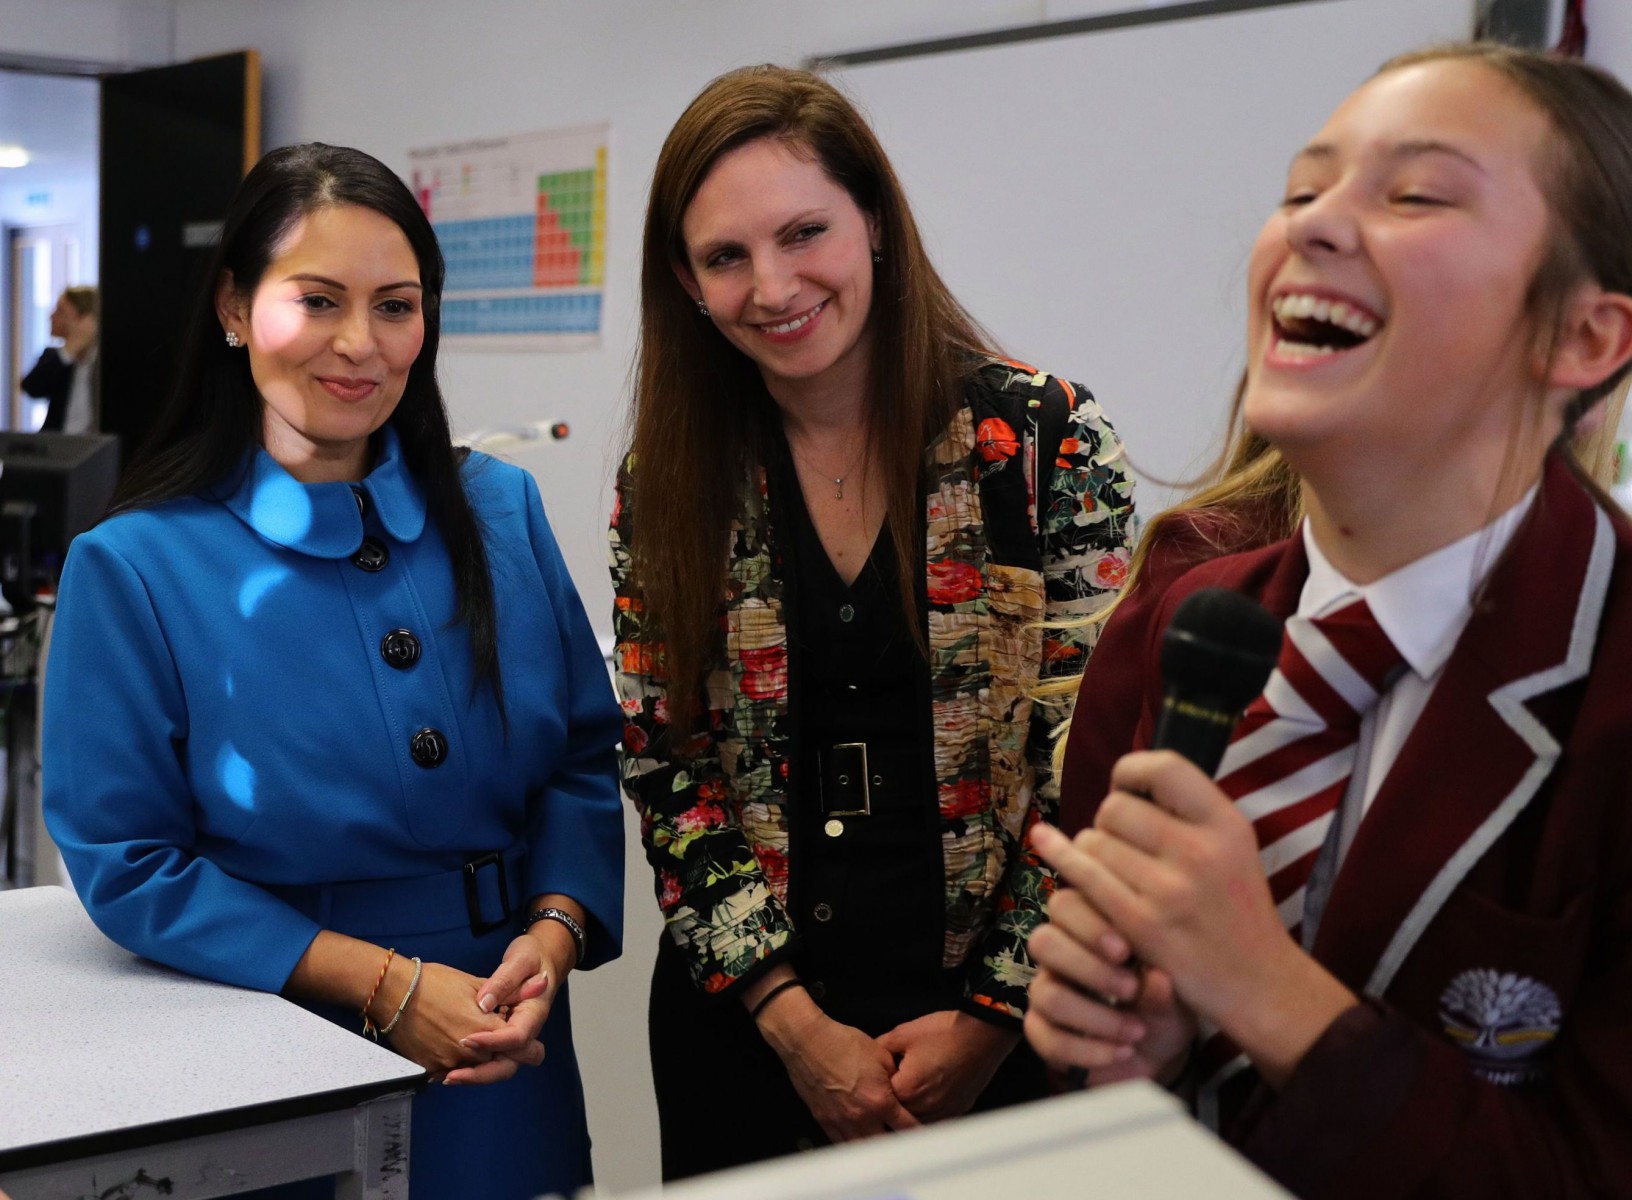 Priti Patel, who visited a Surrey school on the campaign trail, warned backing total free movement would be a national security risk